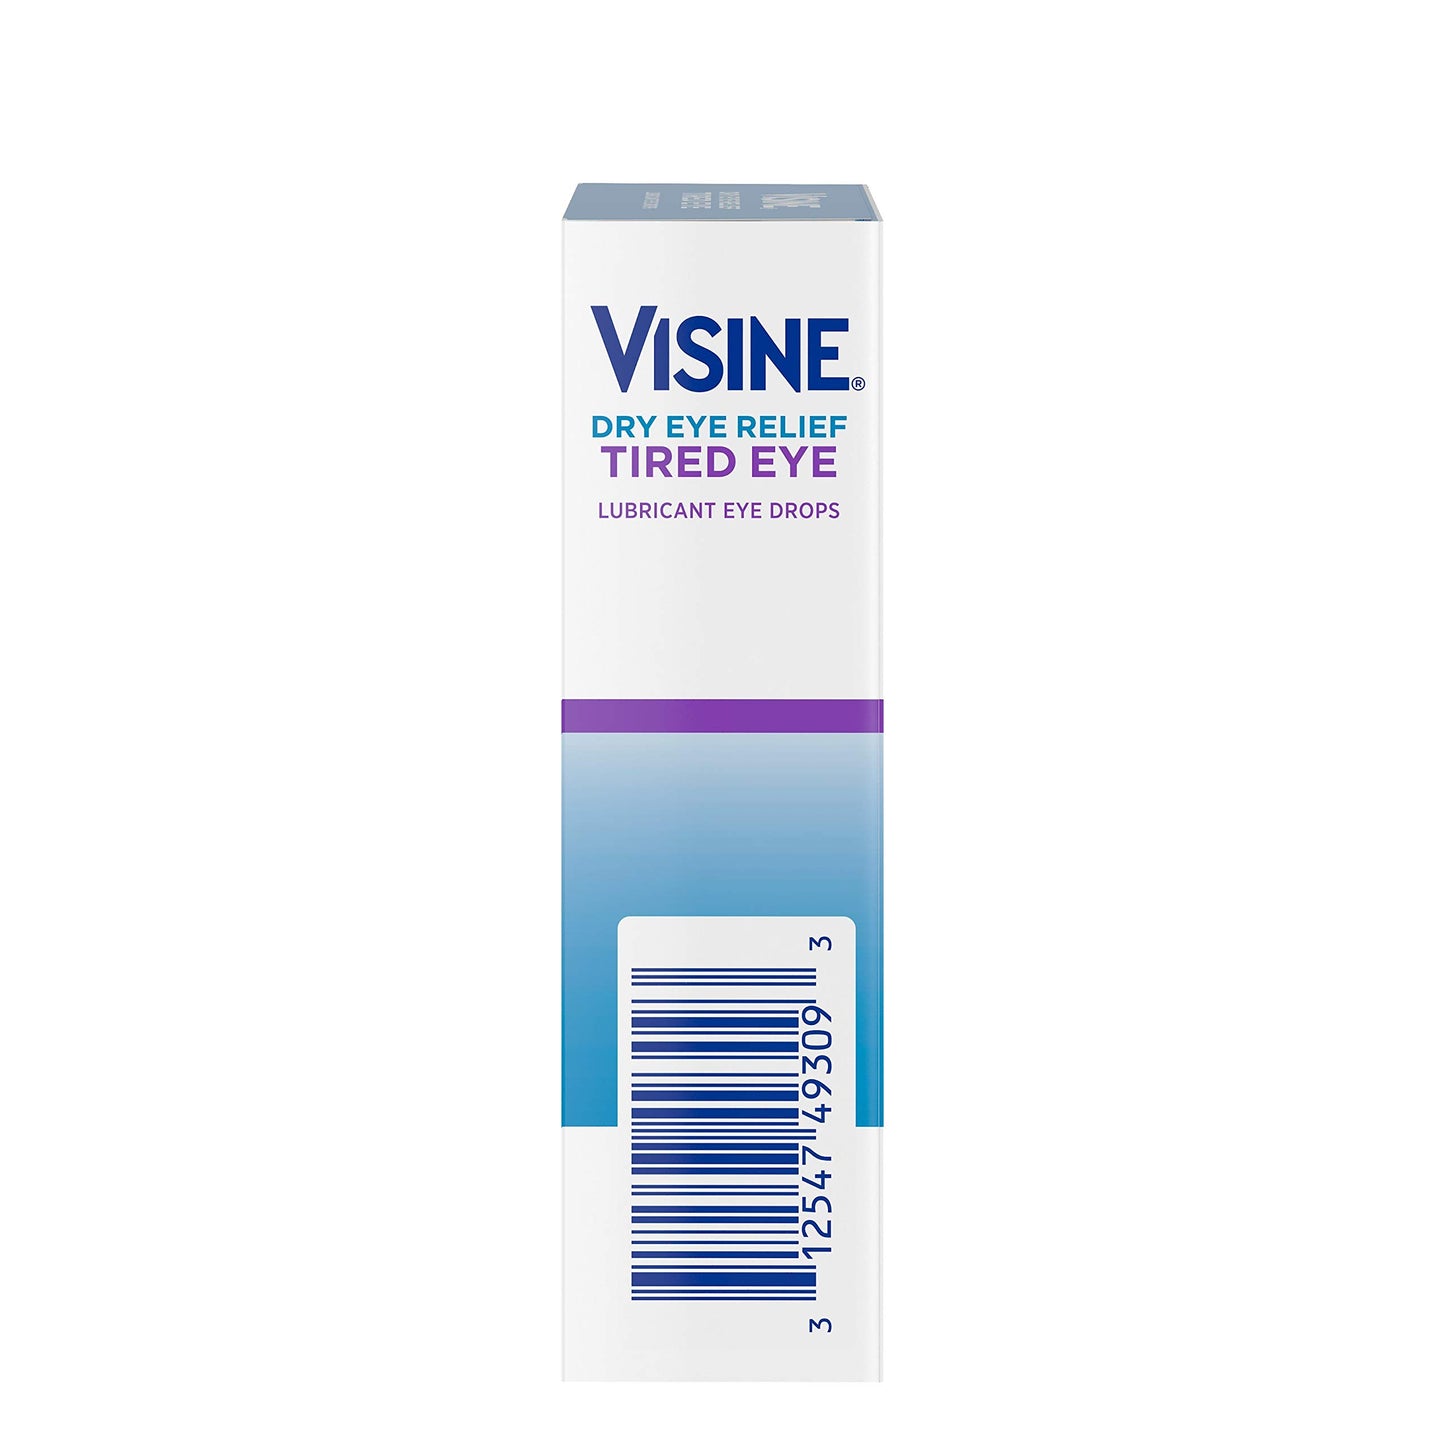 Visine Dry Eye Relief Tired Eye Lubricant Eye Drops, Moisturizing & Soothing Sterile Drops for Irritated, Dry & Tired Eyes Due to Screen Time Irritation, Polyethylene Glycol, 0.5 fl. oz